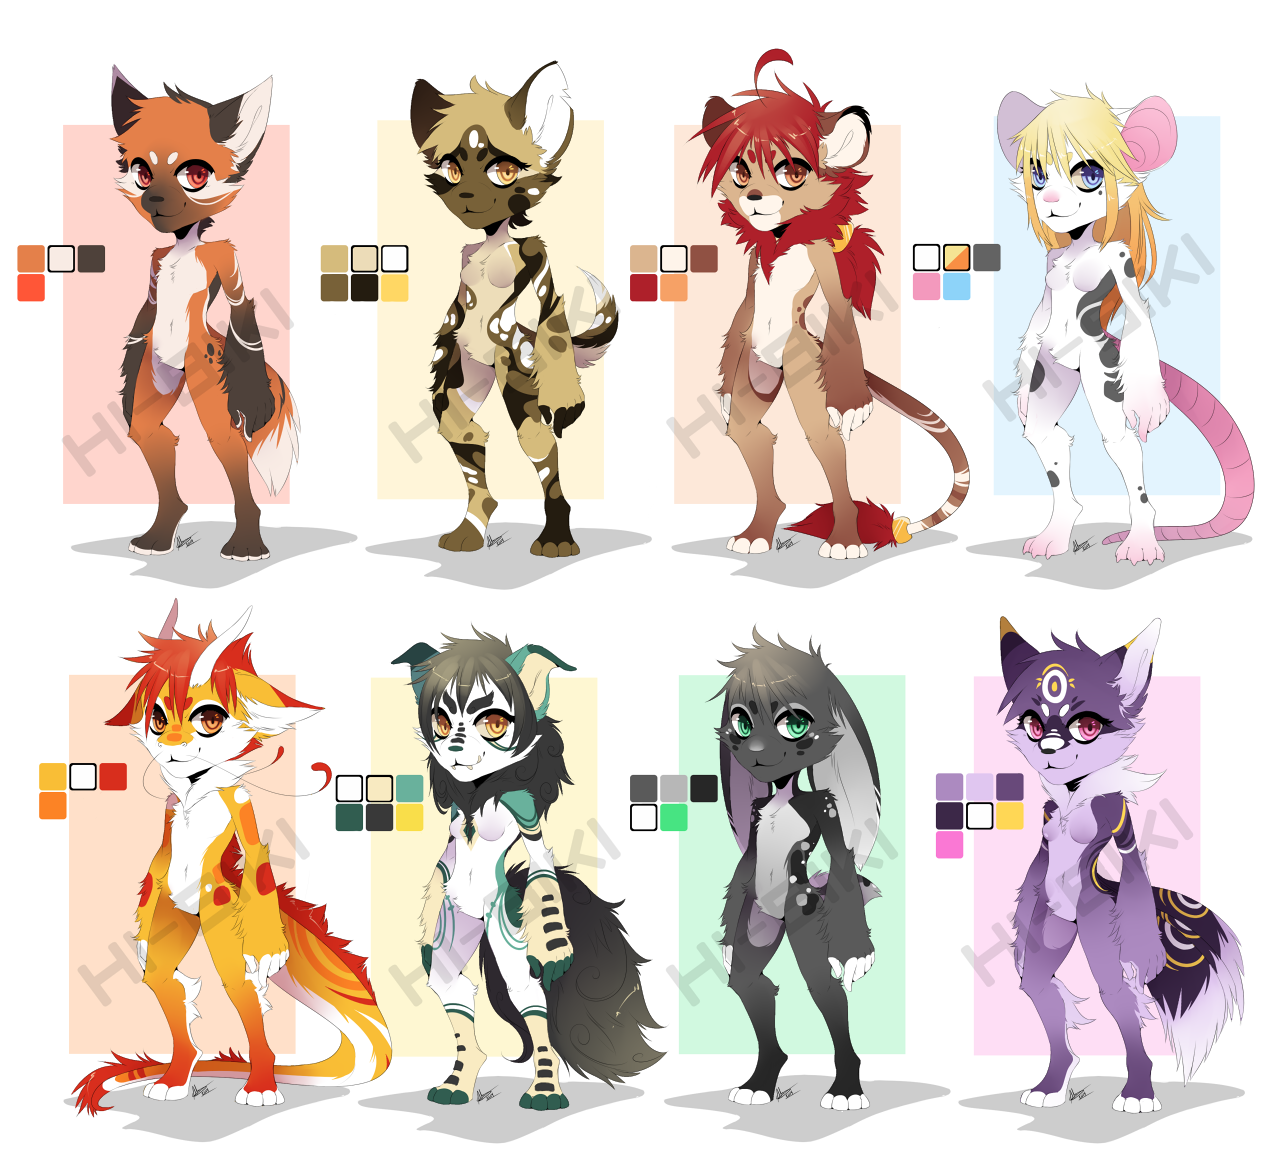 Furry characters